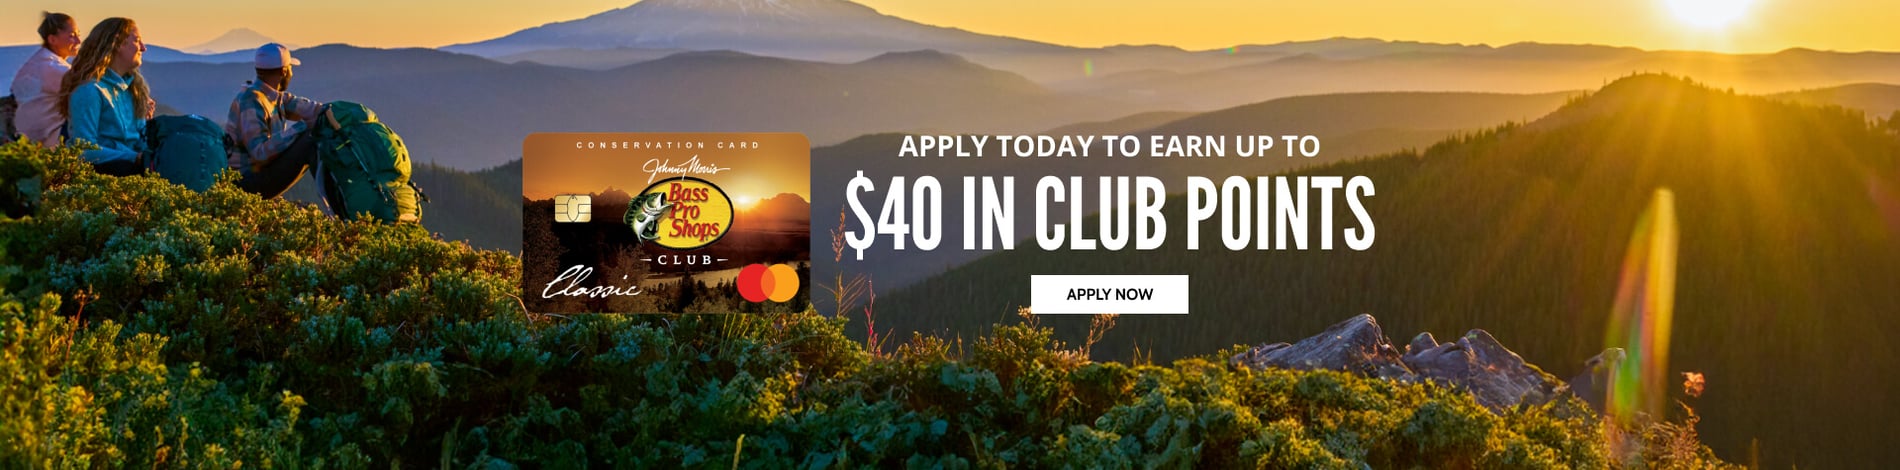 Earn up to $40 in CLUB Points!